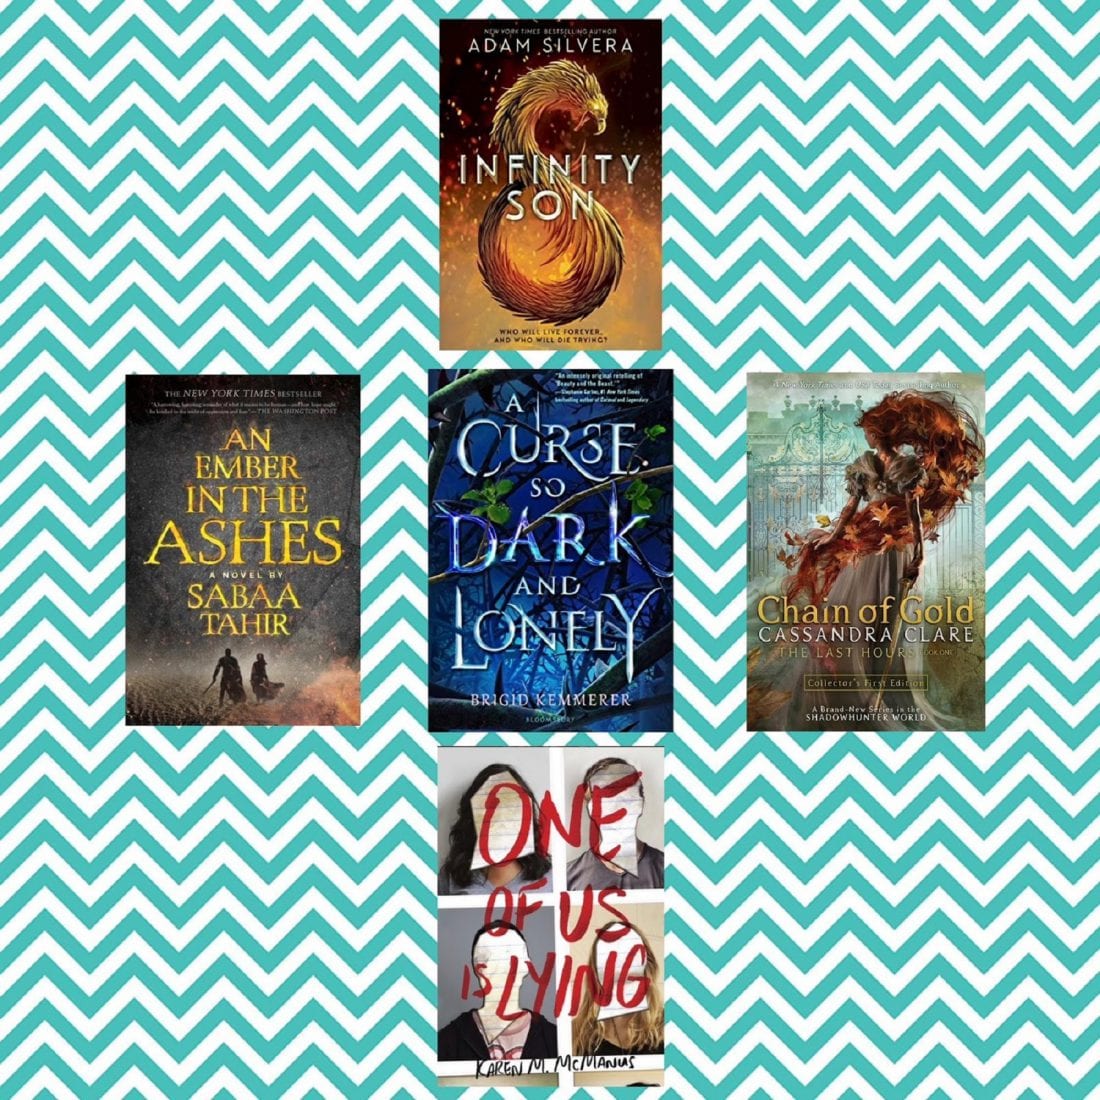 ALT TEXT: A Photo Collage of Different YA Series, An Ember in the Ashes by Sabaa Tahir, Chain of Gold by Cassandra Clare, One of Us Is Lying Karen M. McManus, A Curse So Dark and Lonely by Brigid Kemmerer, Infinity Son by Adam SIlvera YA Series Round Up